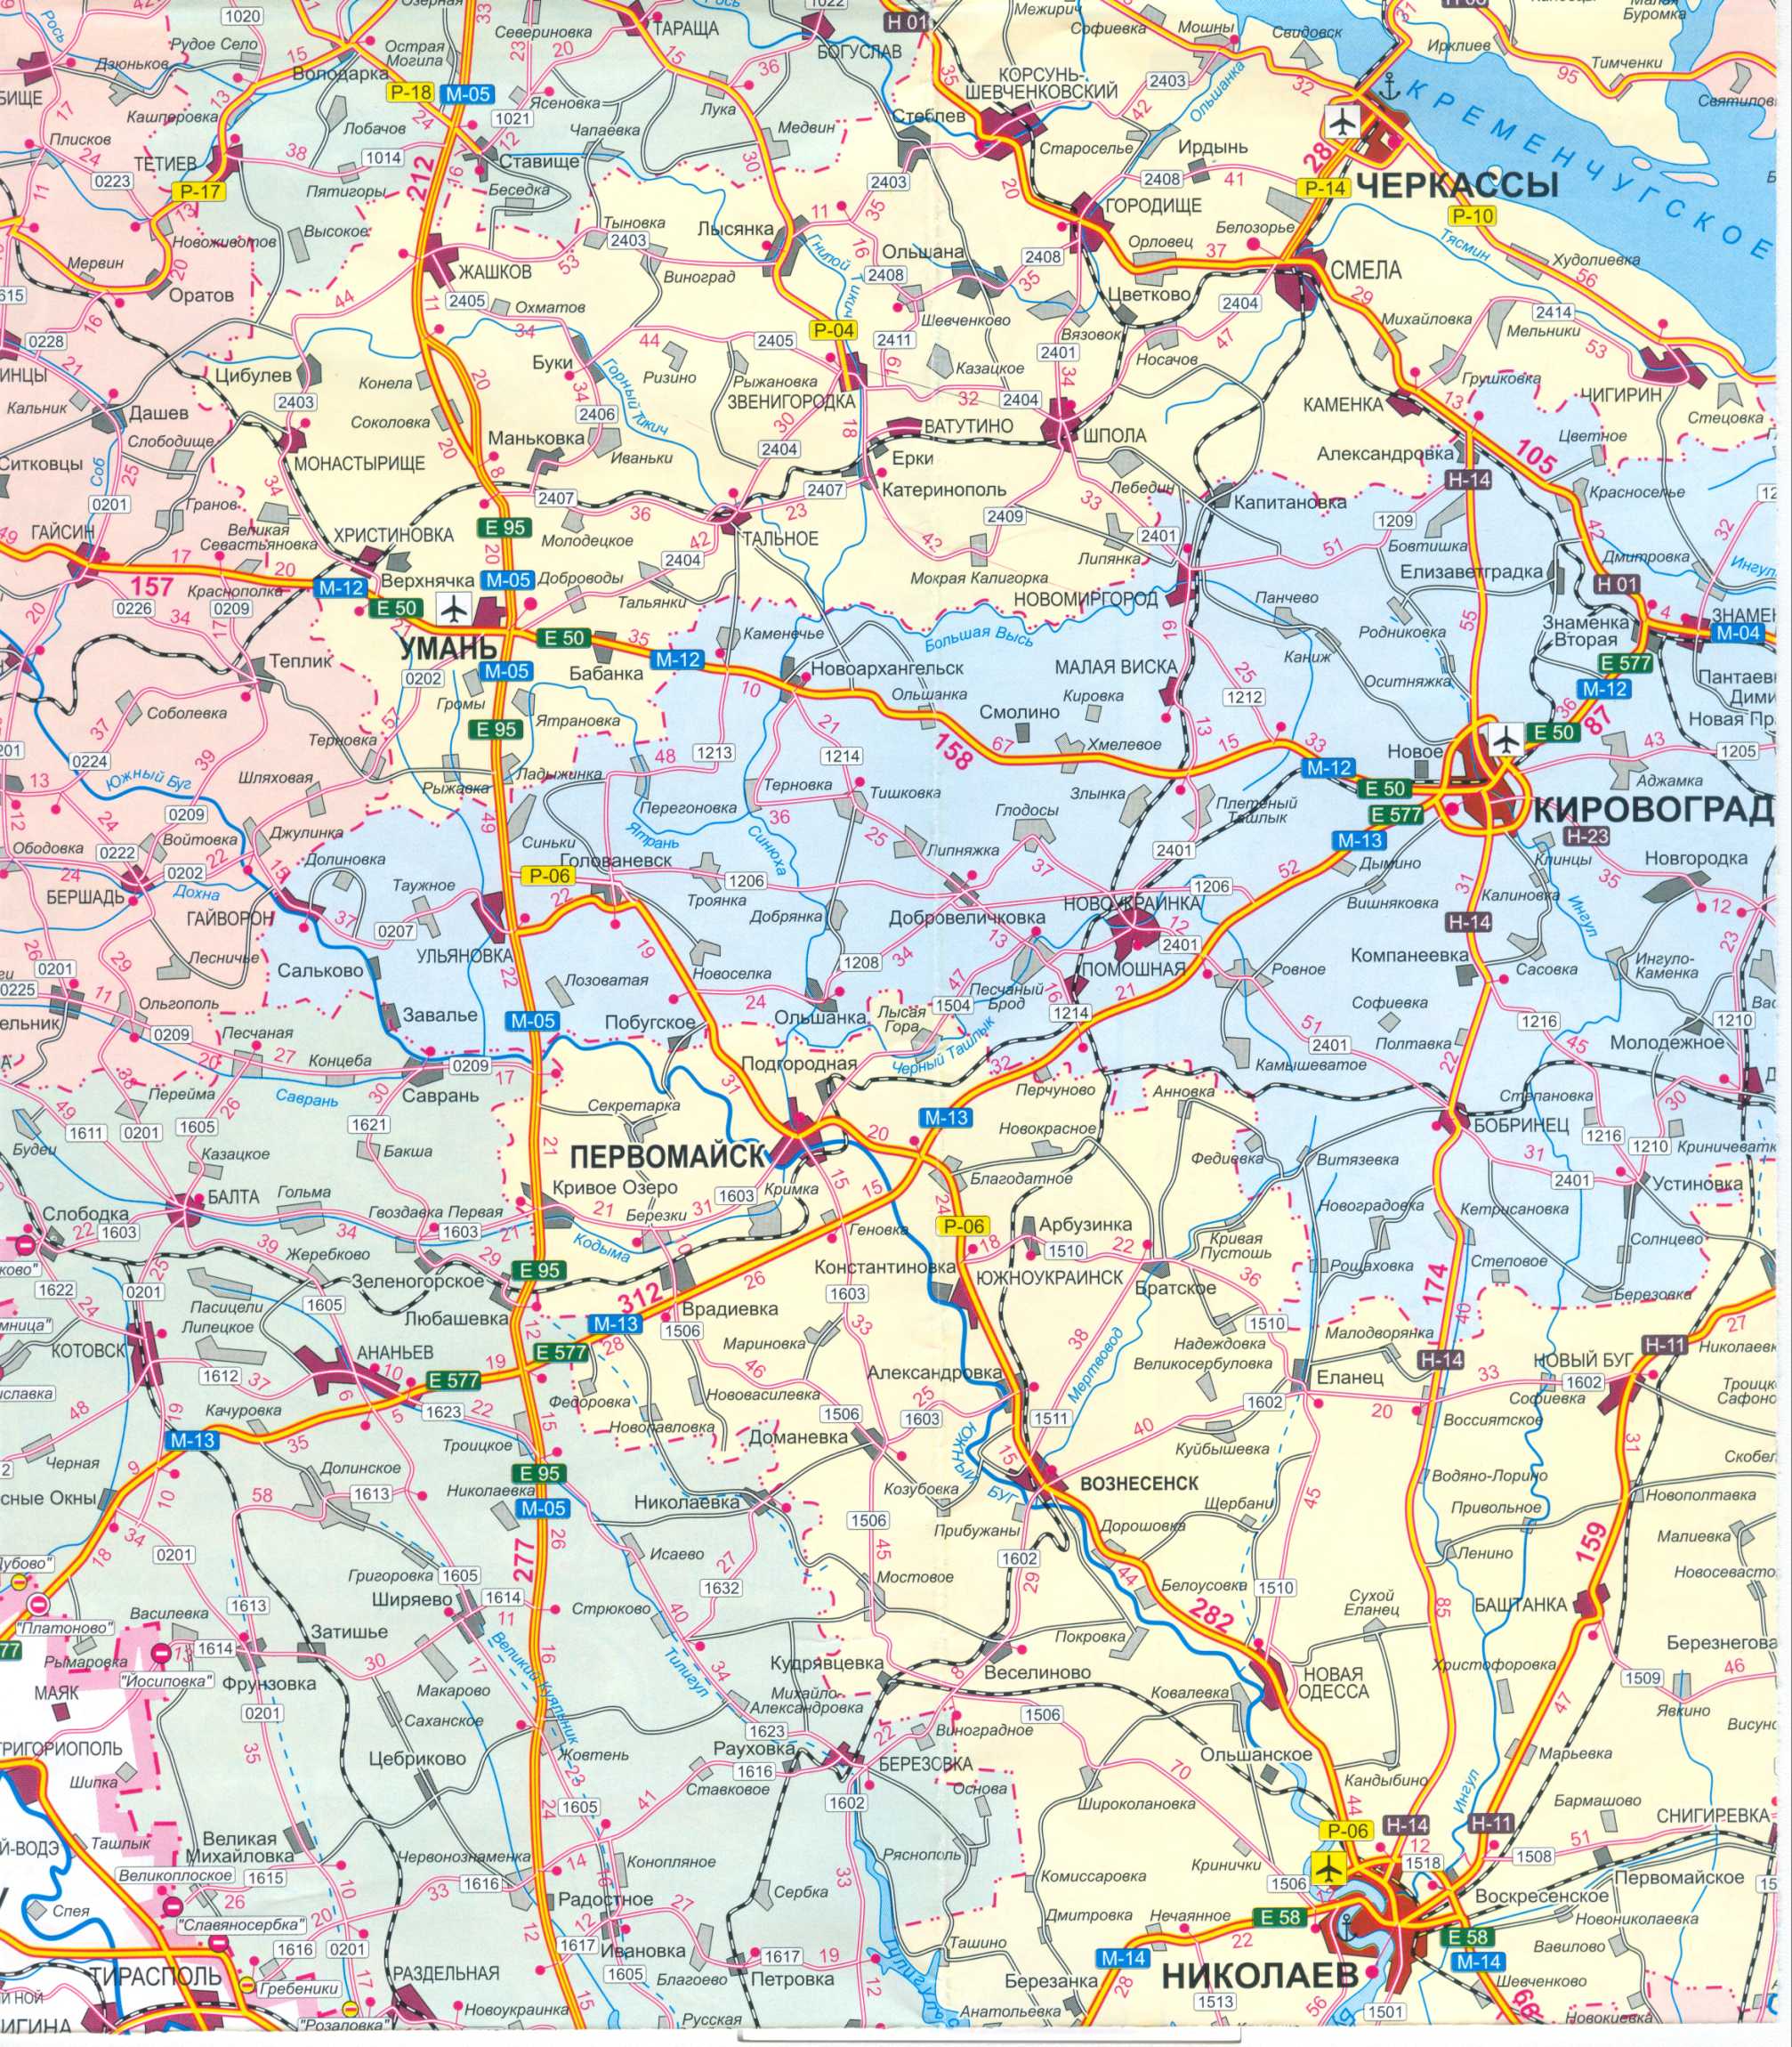 The map of Ukraine is free of charge. Map of roads of Ukraine free download. Great map of Ukraine's roads for free, C1